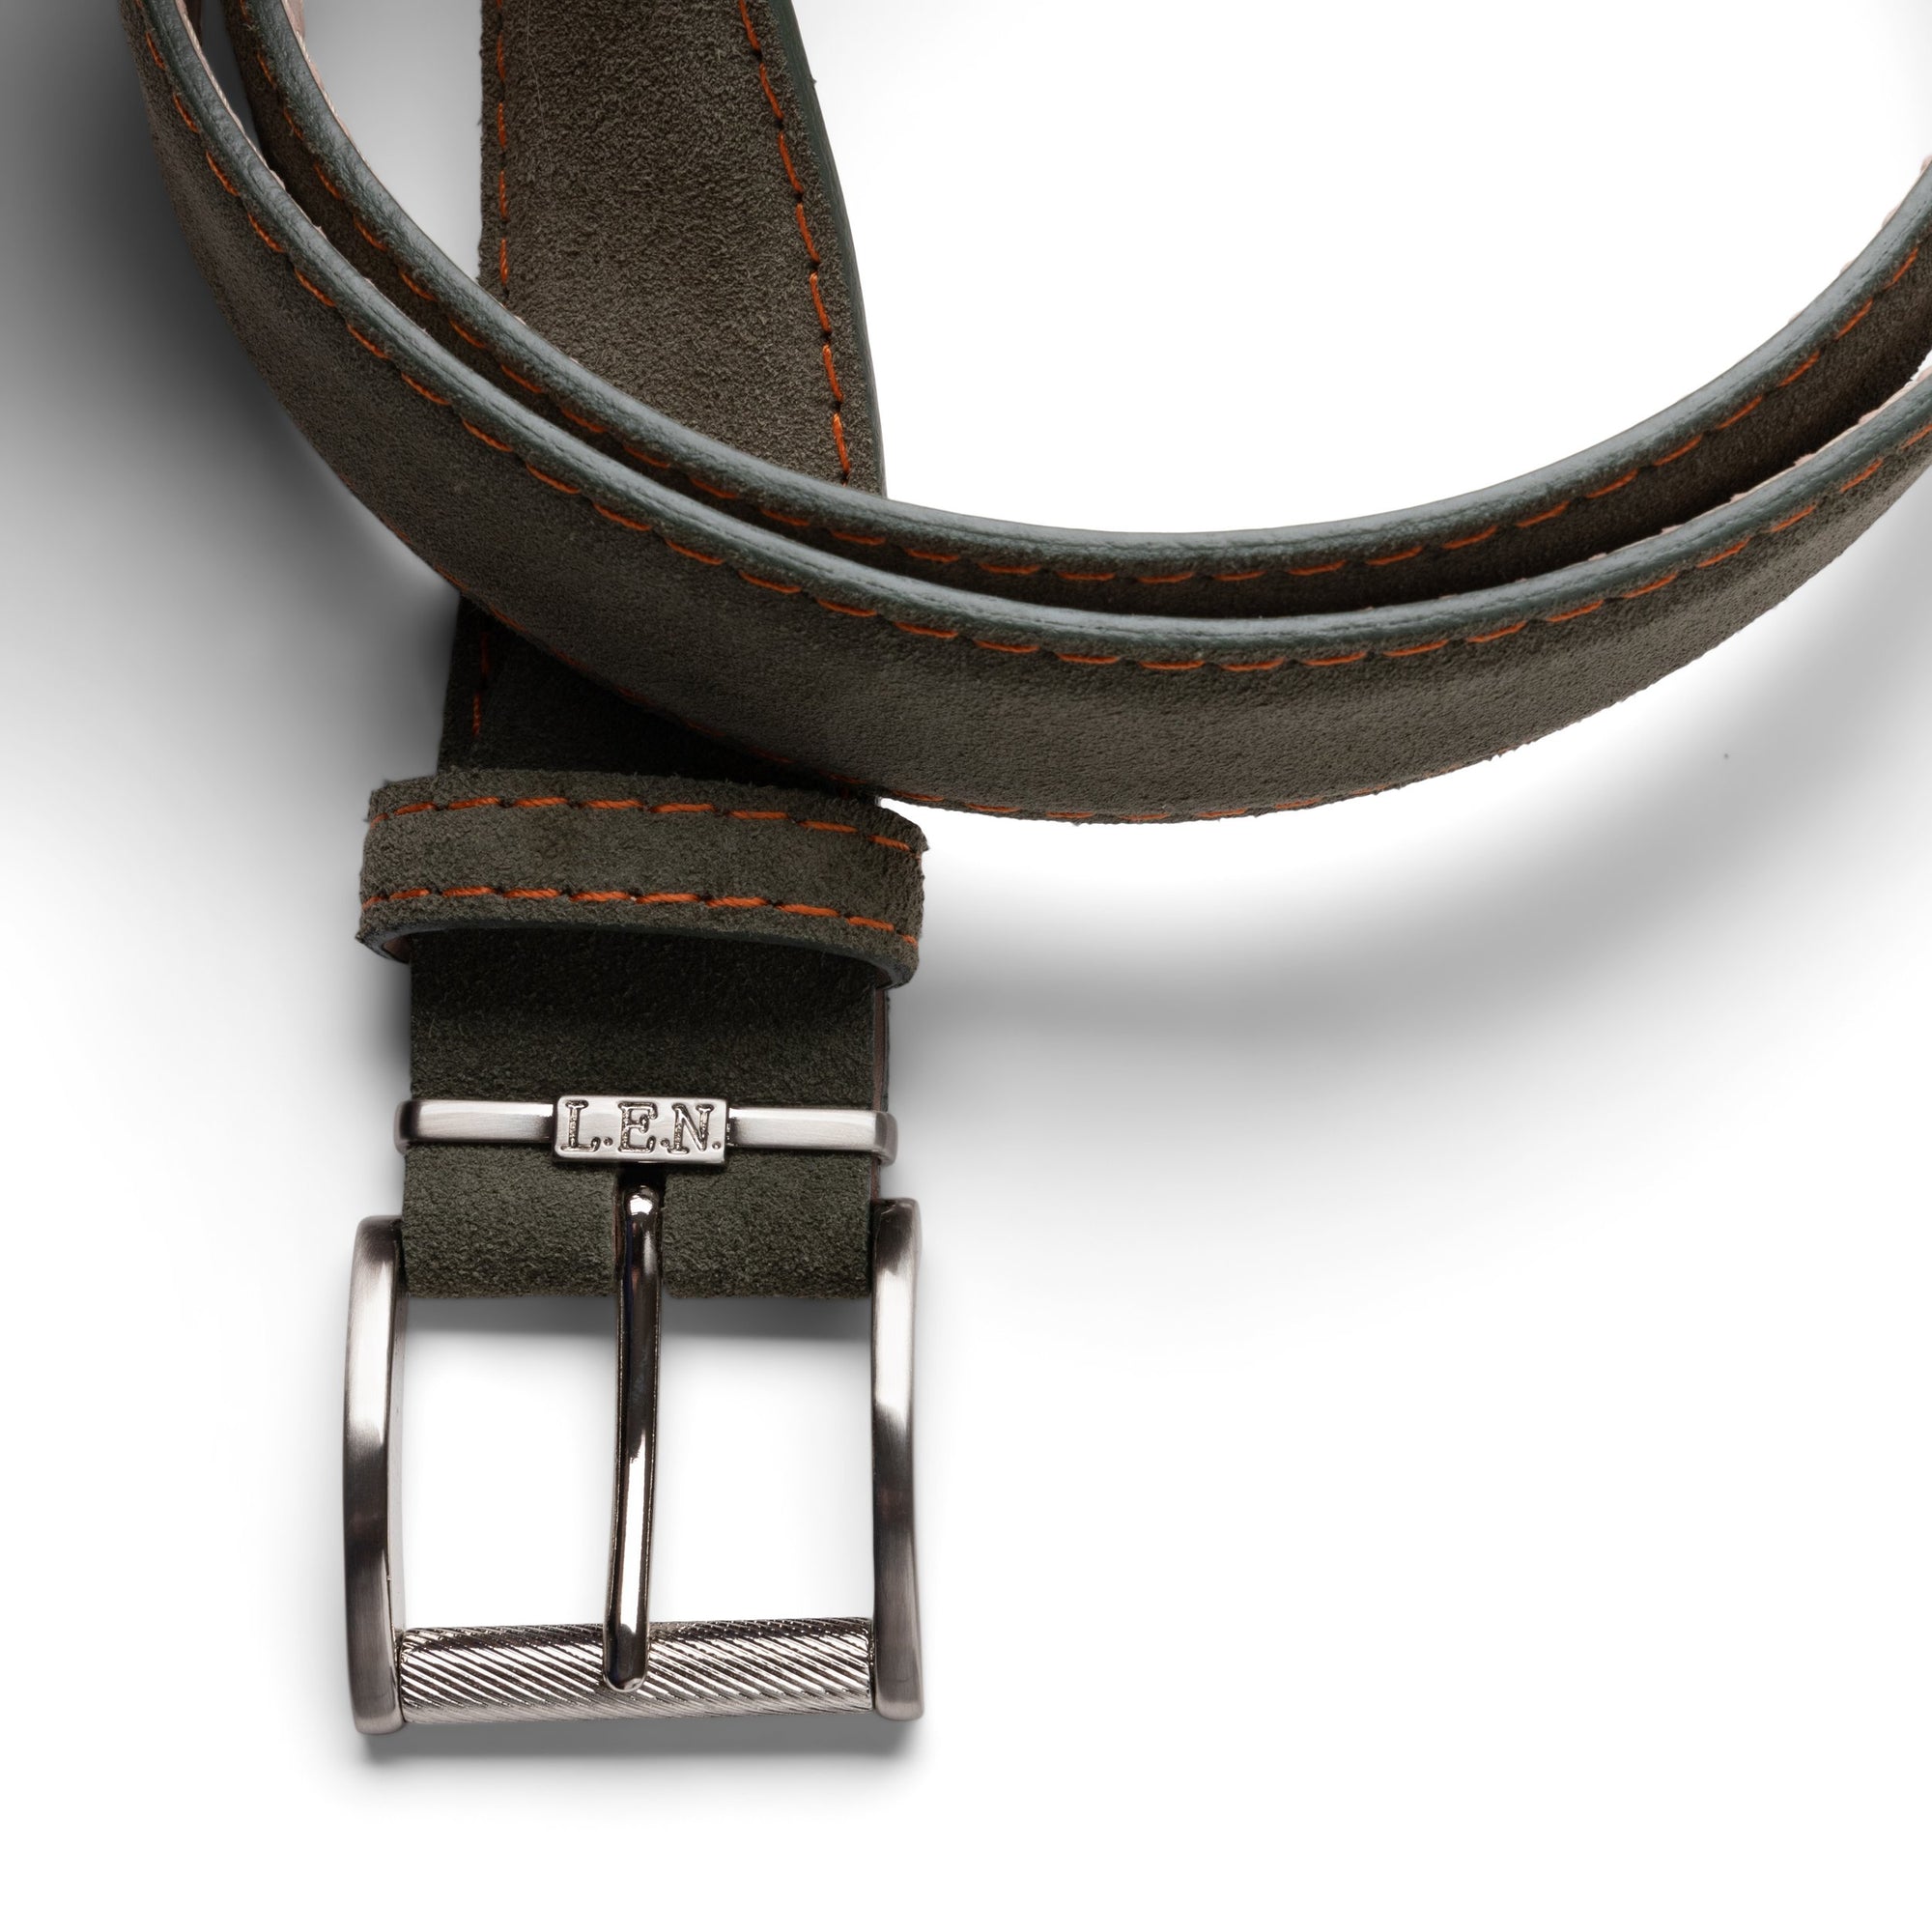 Italian Suede Belt in Olive with Orange Stitching by L.E.N. Bespoke